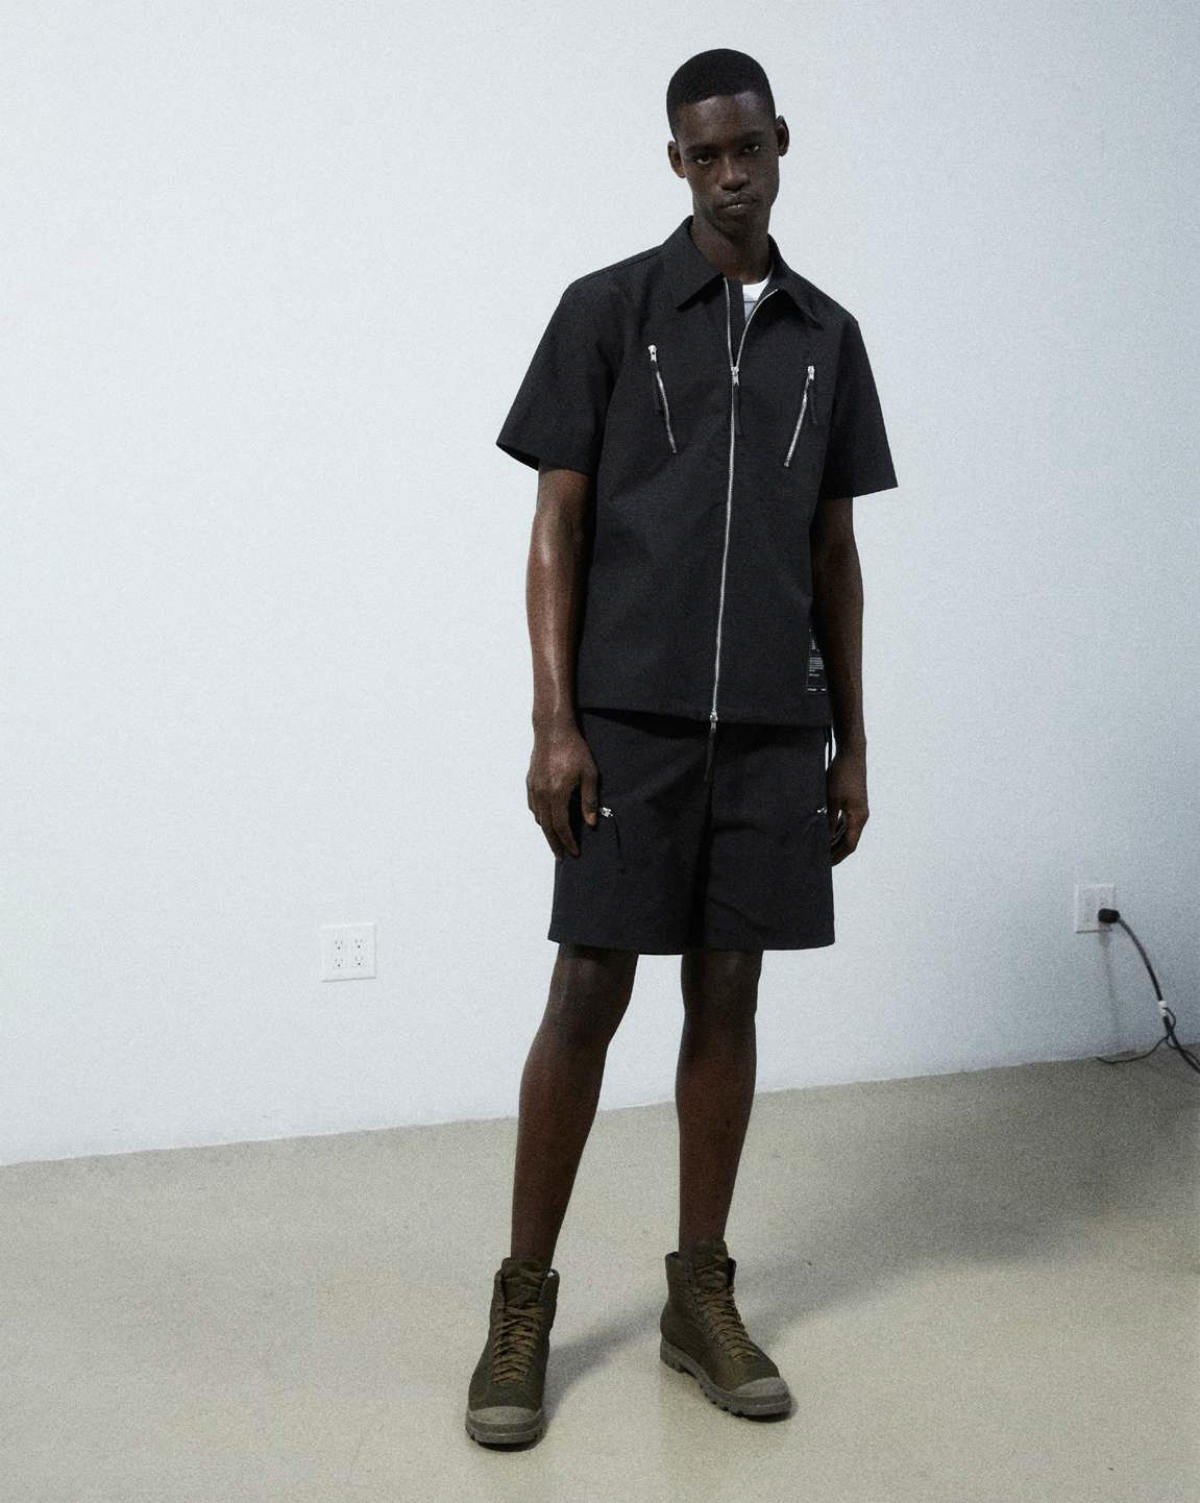 Helmut Lang Presents Its New Pre-Fall 2022 Menswear Collection